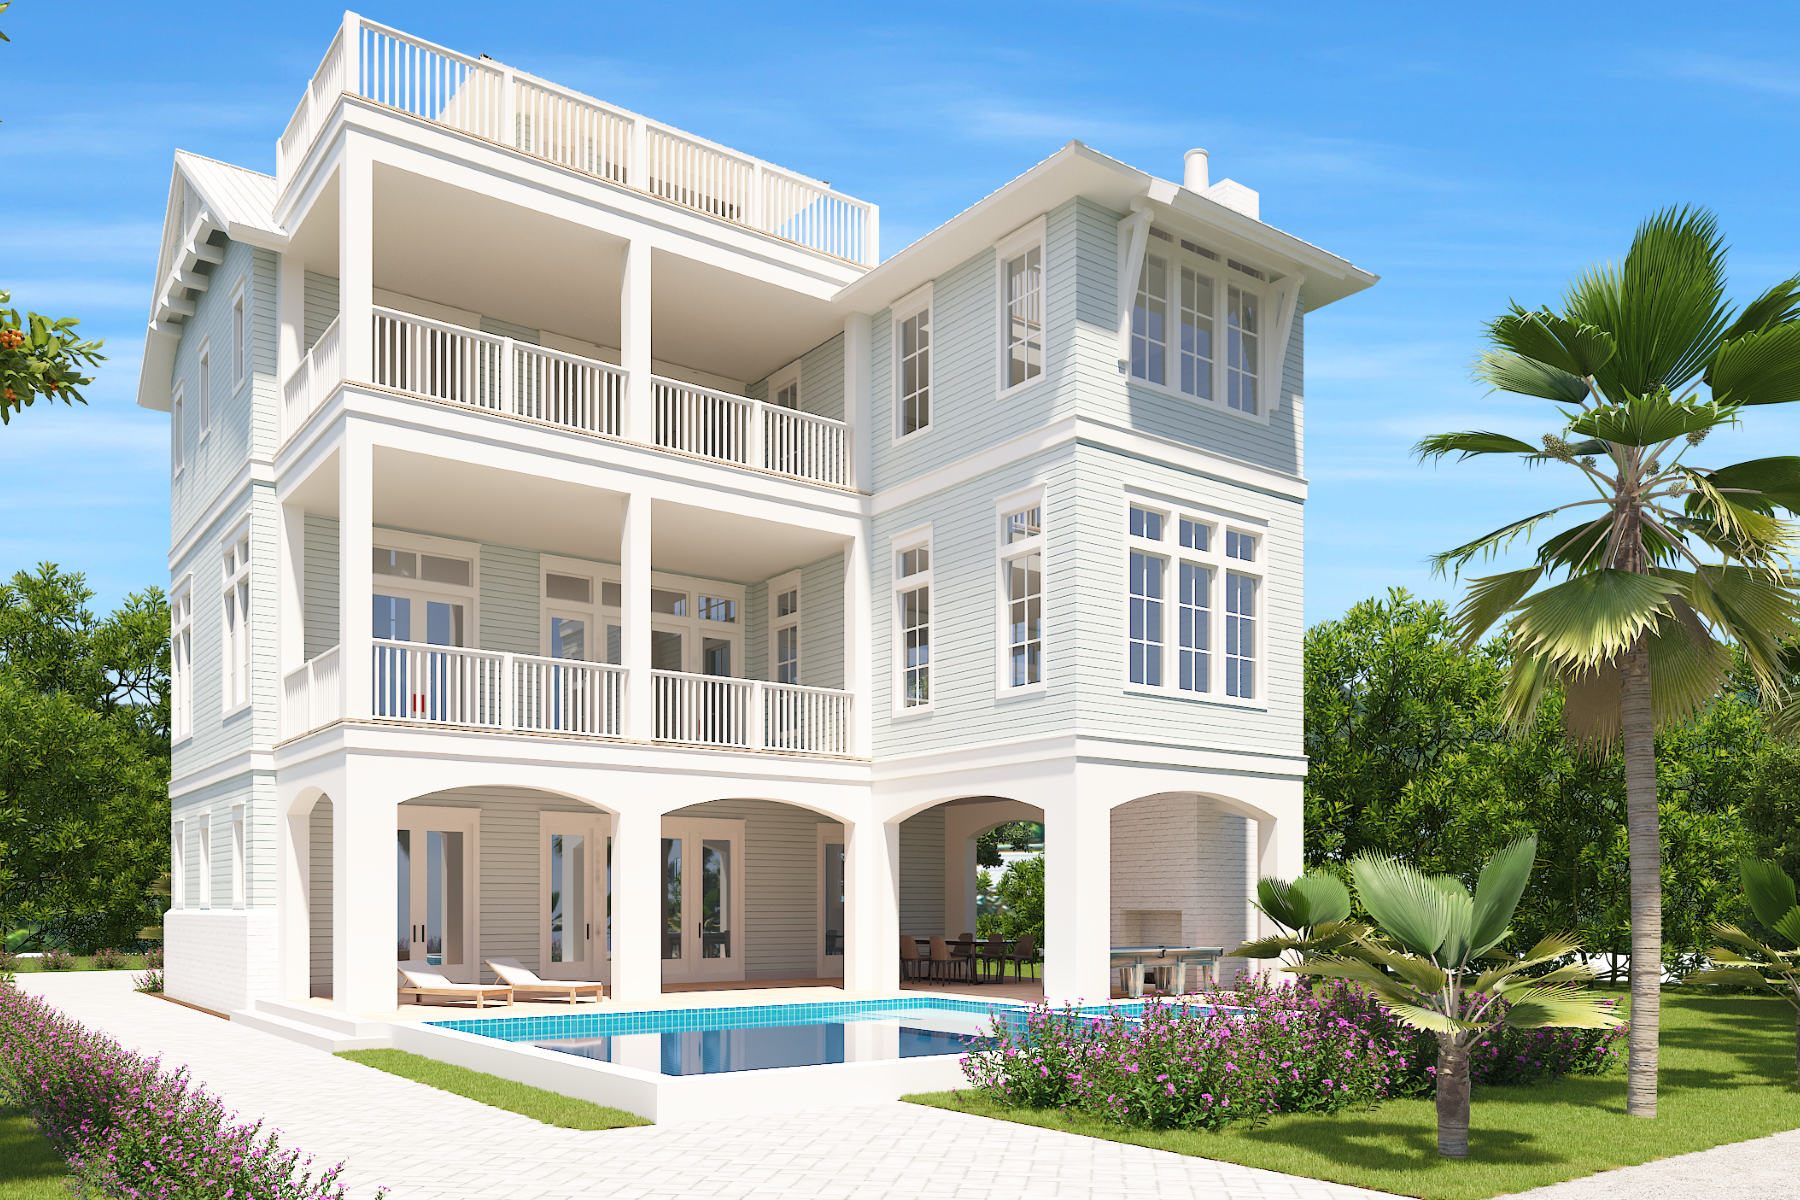 Single Family Homes for Sale at New Beach Retreat with Private Pool and Beach Access in Old Seagrove 2917 E County Highway 30A Santa Rosa Beach, Florida 32459 United States